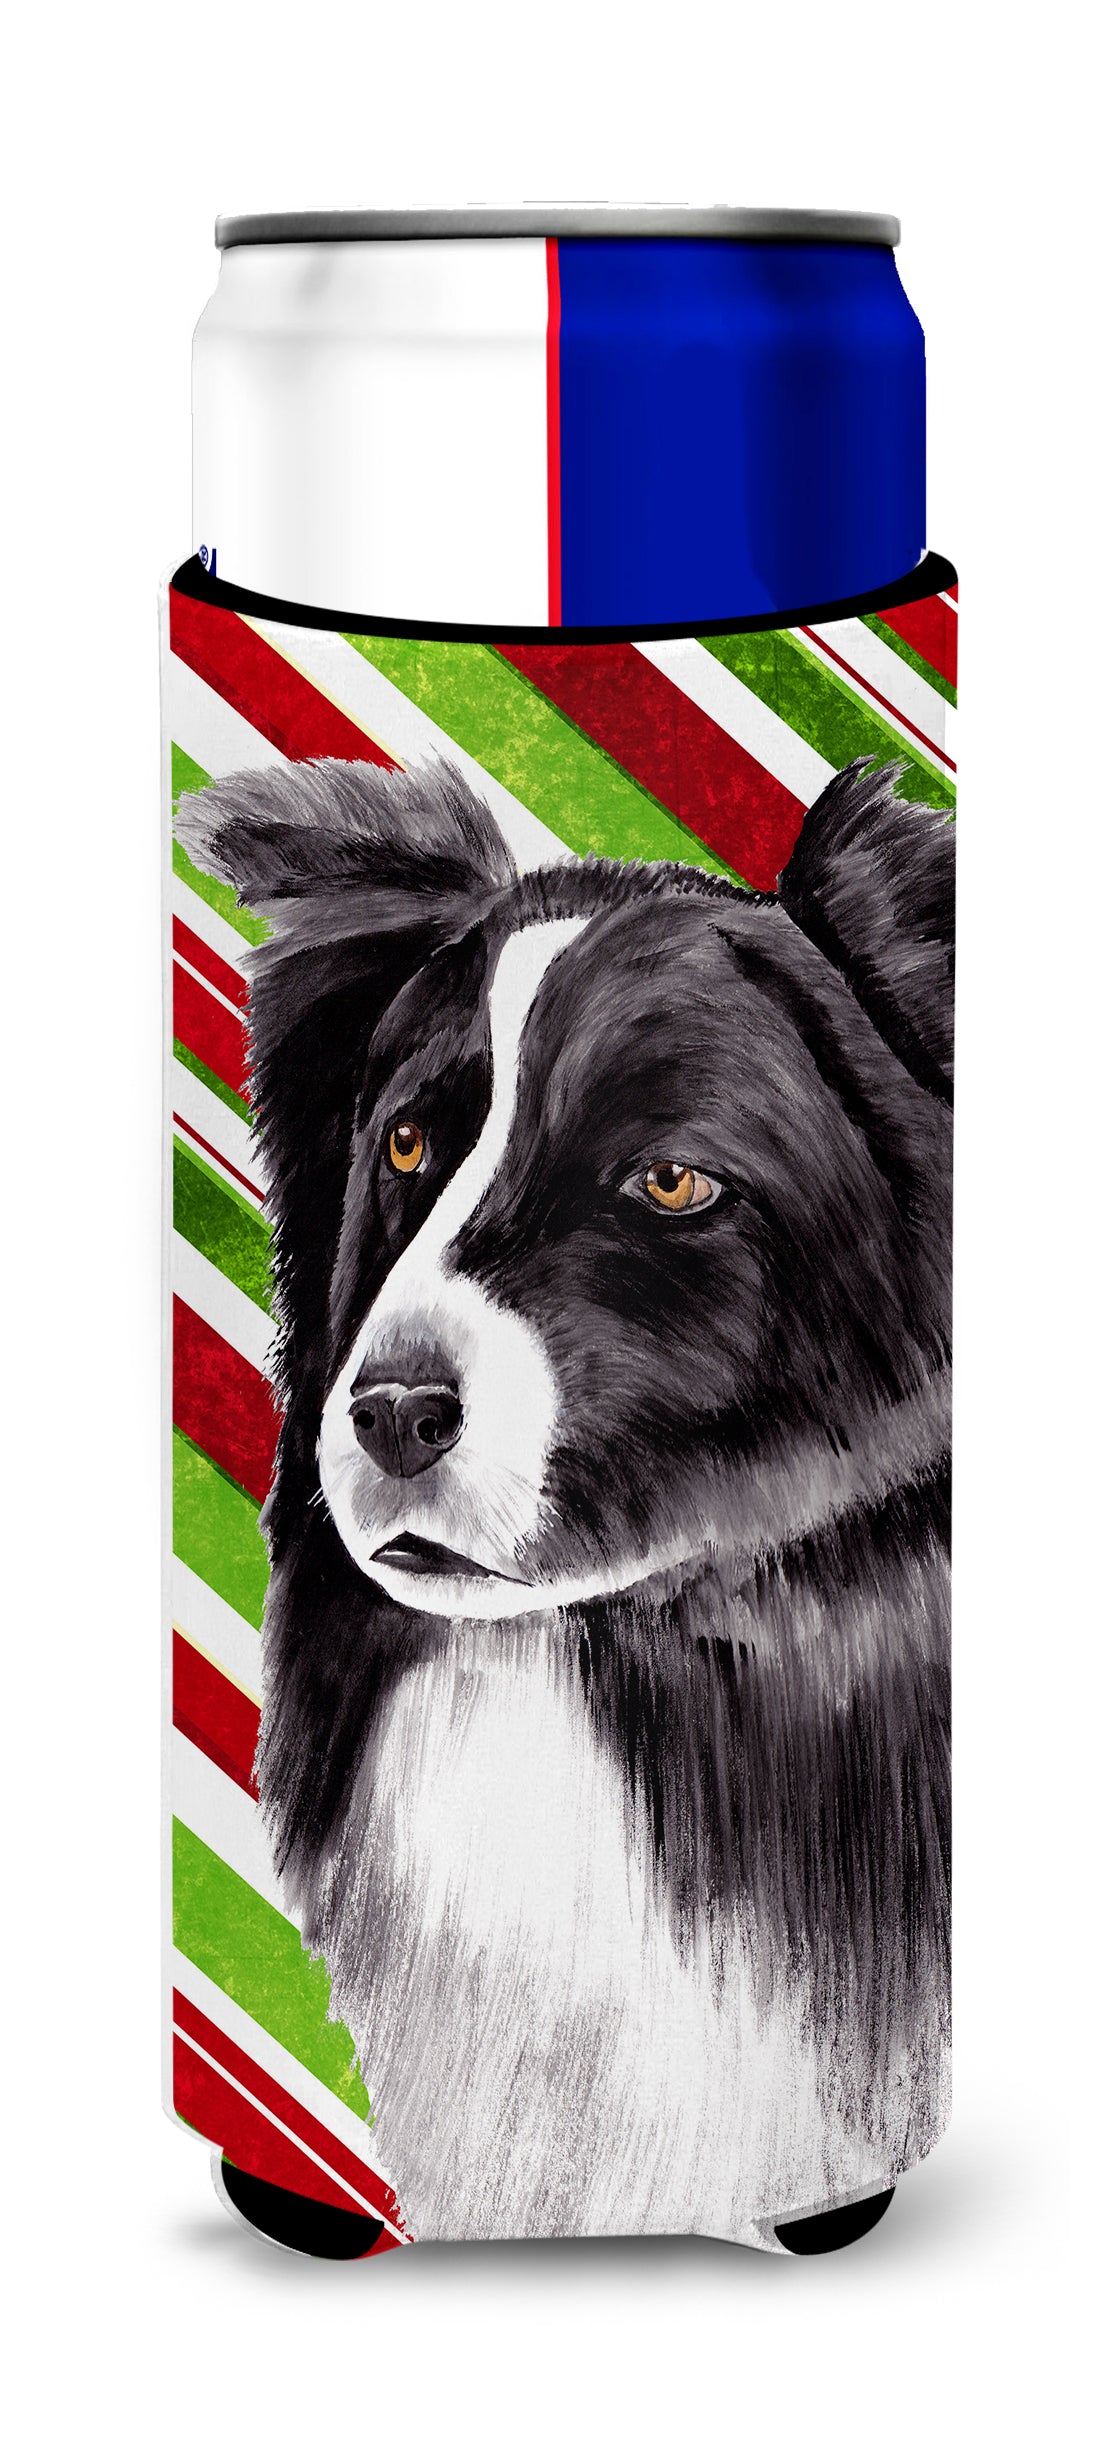 Border Collie Candy Cane Holiday Christmas Ultra Beverage Insulators for slim cans SC9327MUK.